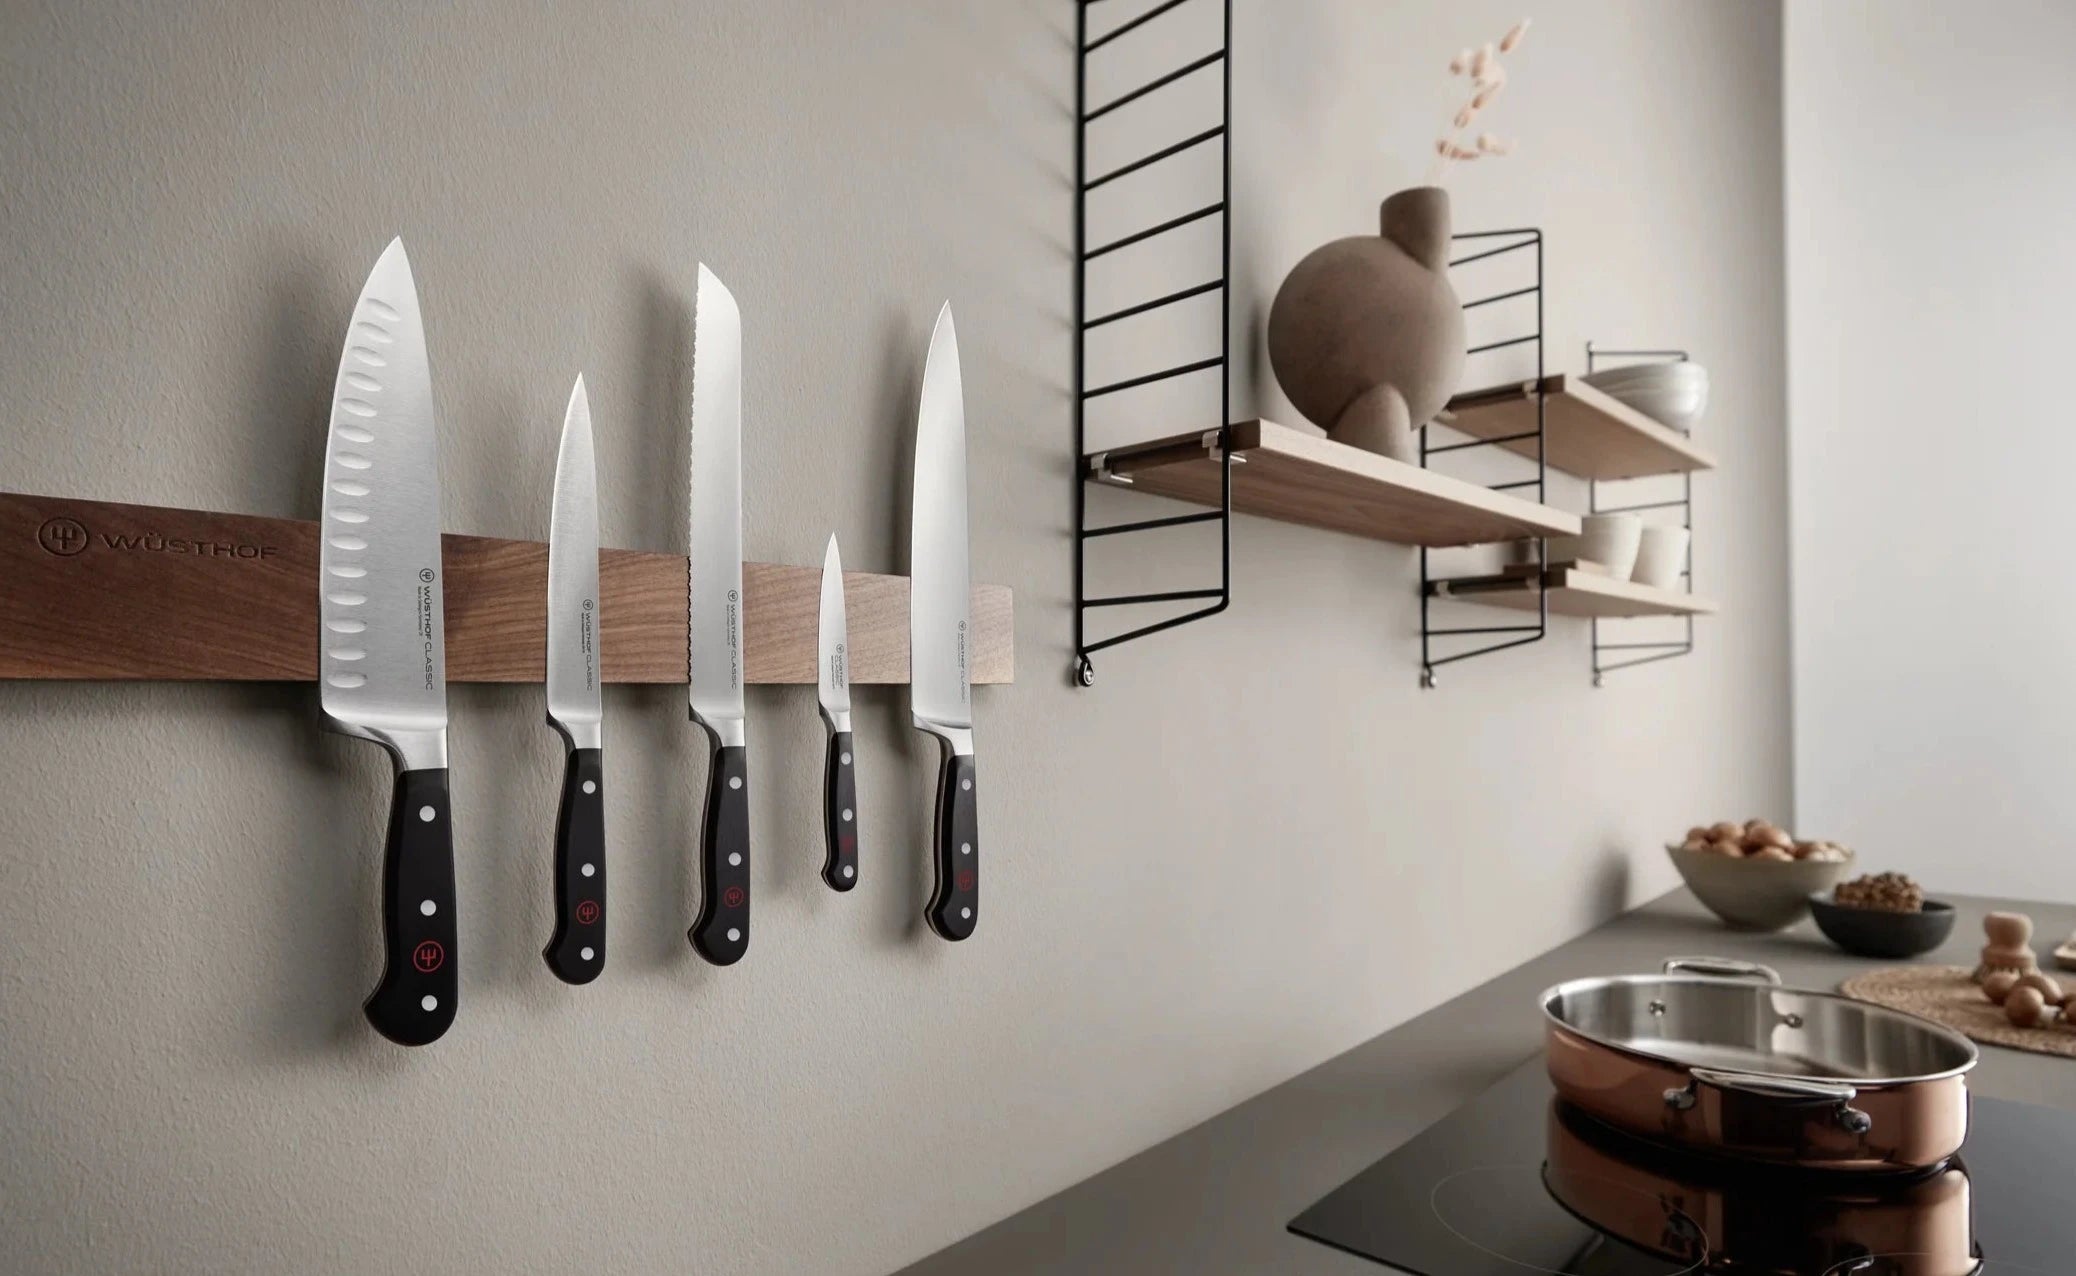 Wusthof 18"Magnabar in Acacia Wood on kitchen wall with Wusthof knives